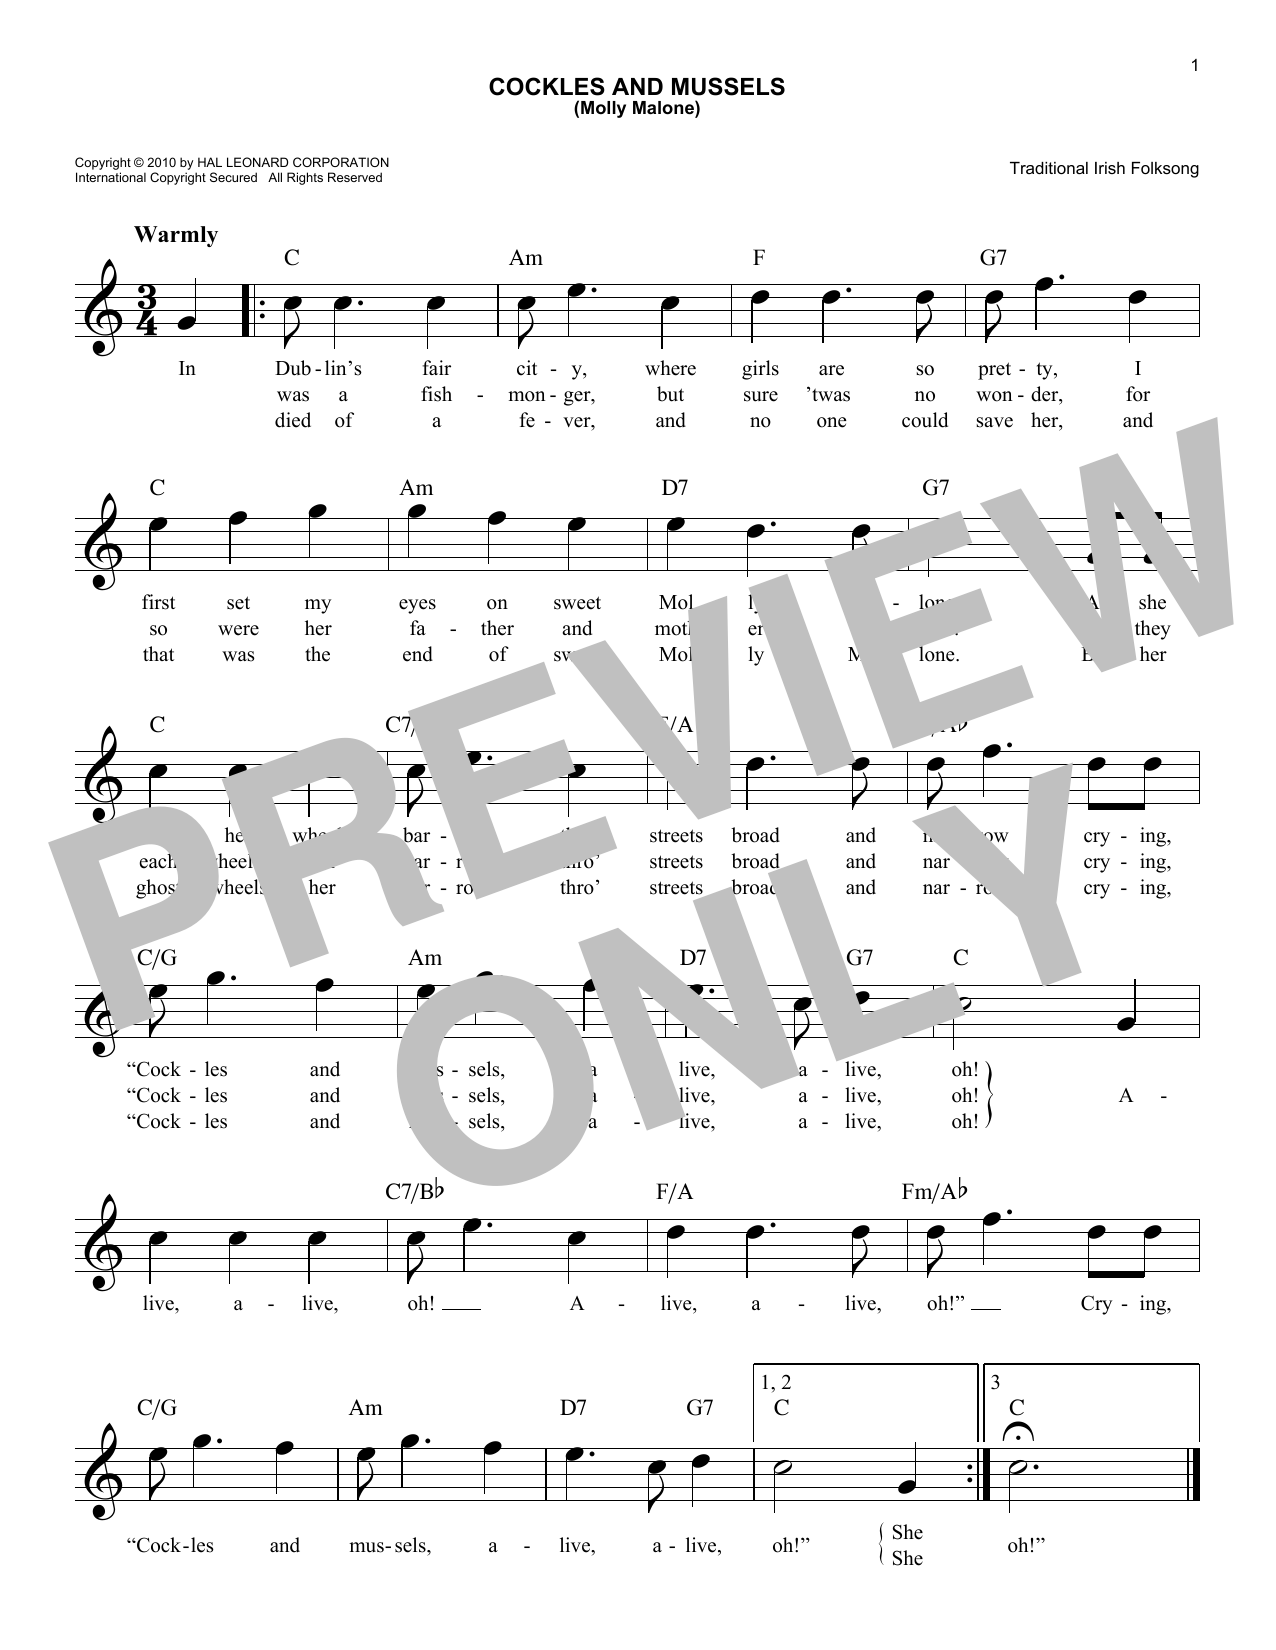 Download Traditional Irish Folksong Cockles And Mussels (Molly Malone) Sheet Music